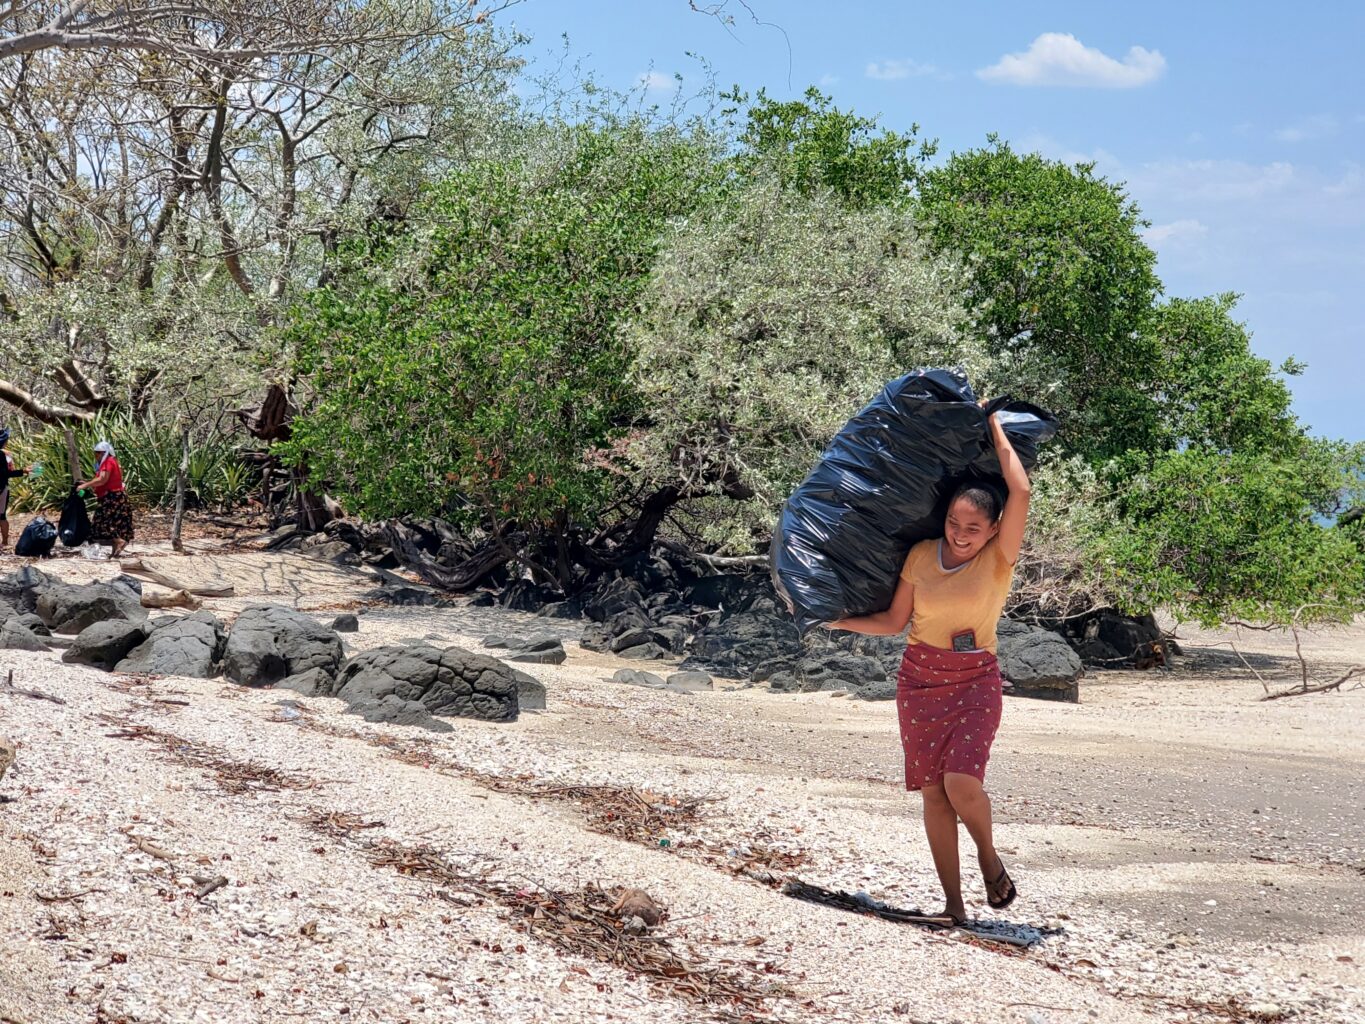 A woman carries a large, full garbage bag